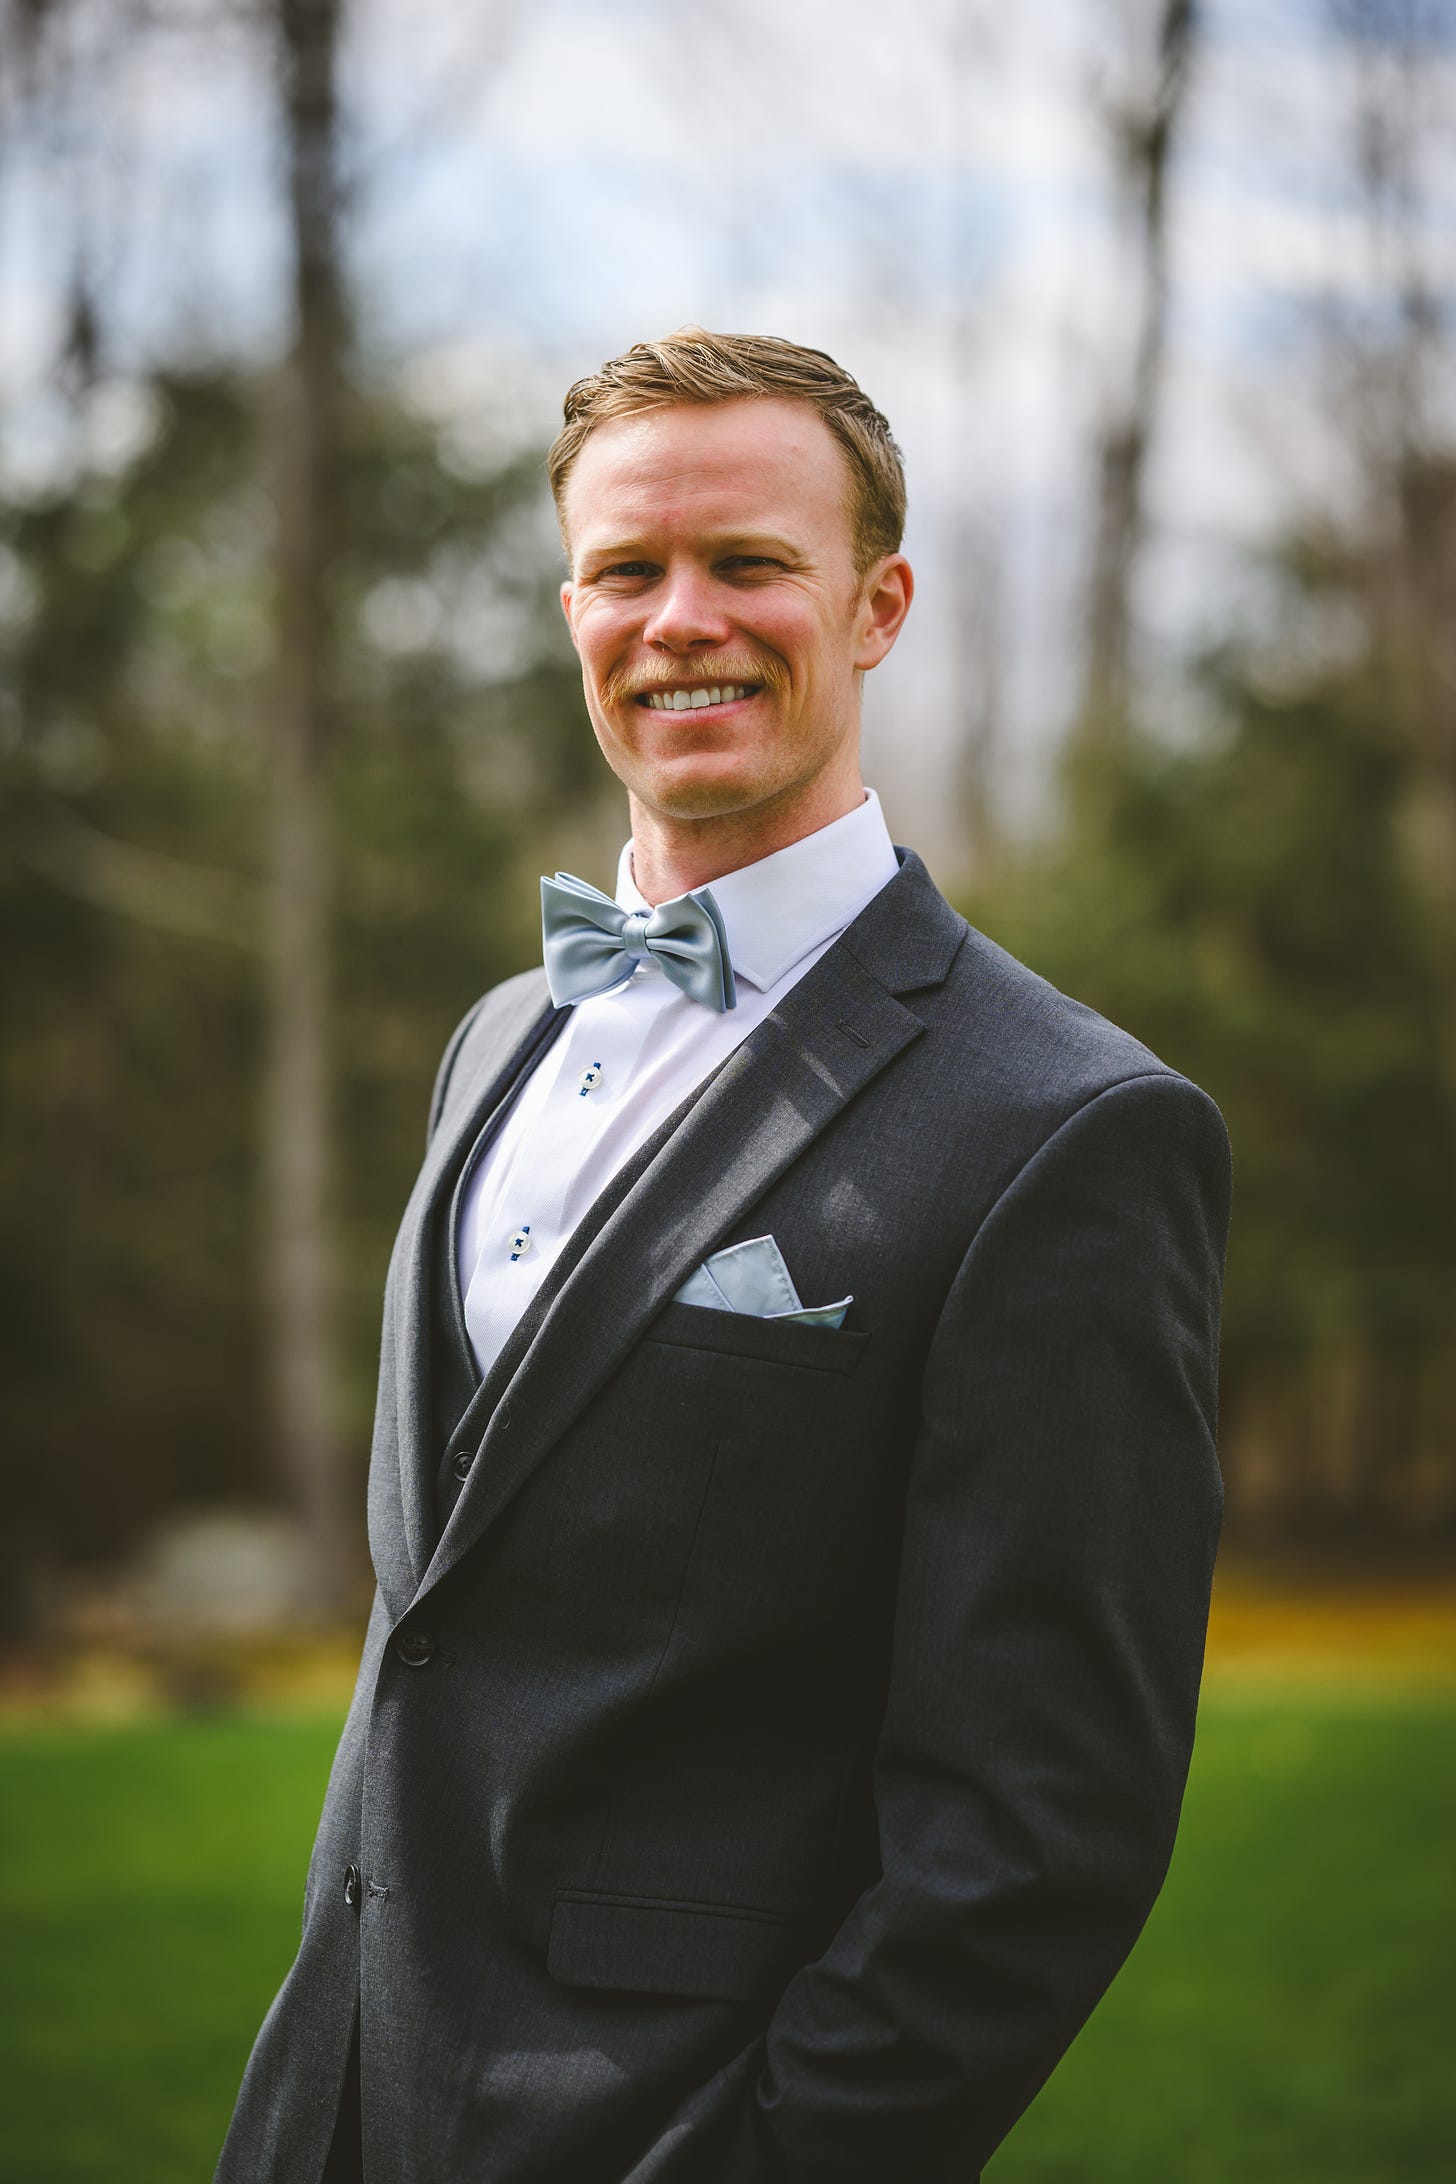 A groom in his suit standing in the woods